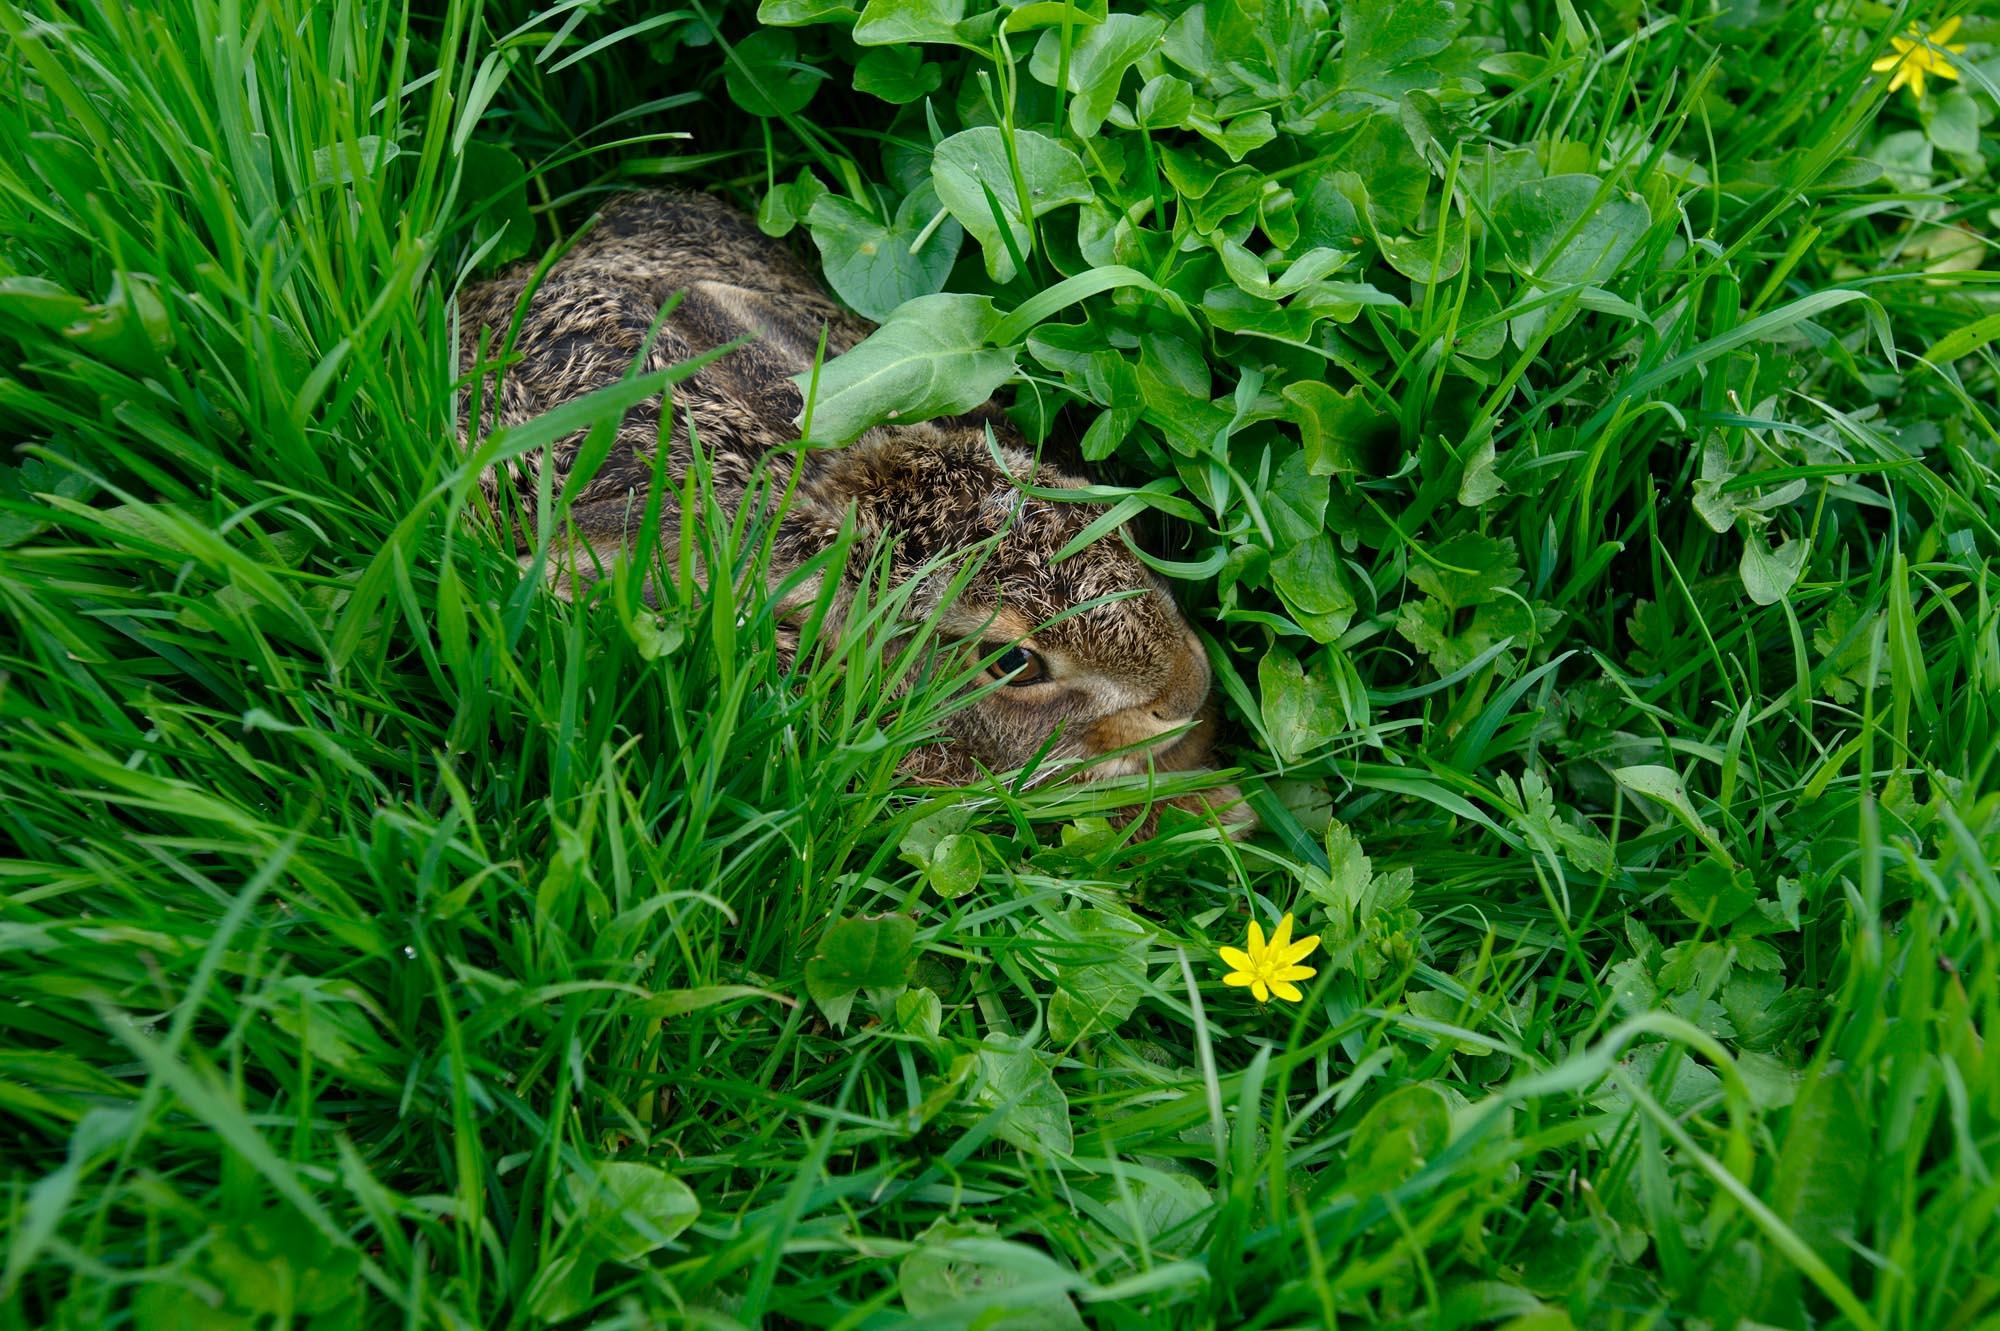 The Other Farm - A young hare is hiding amid grass and lesser celandine on...